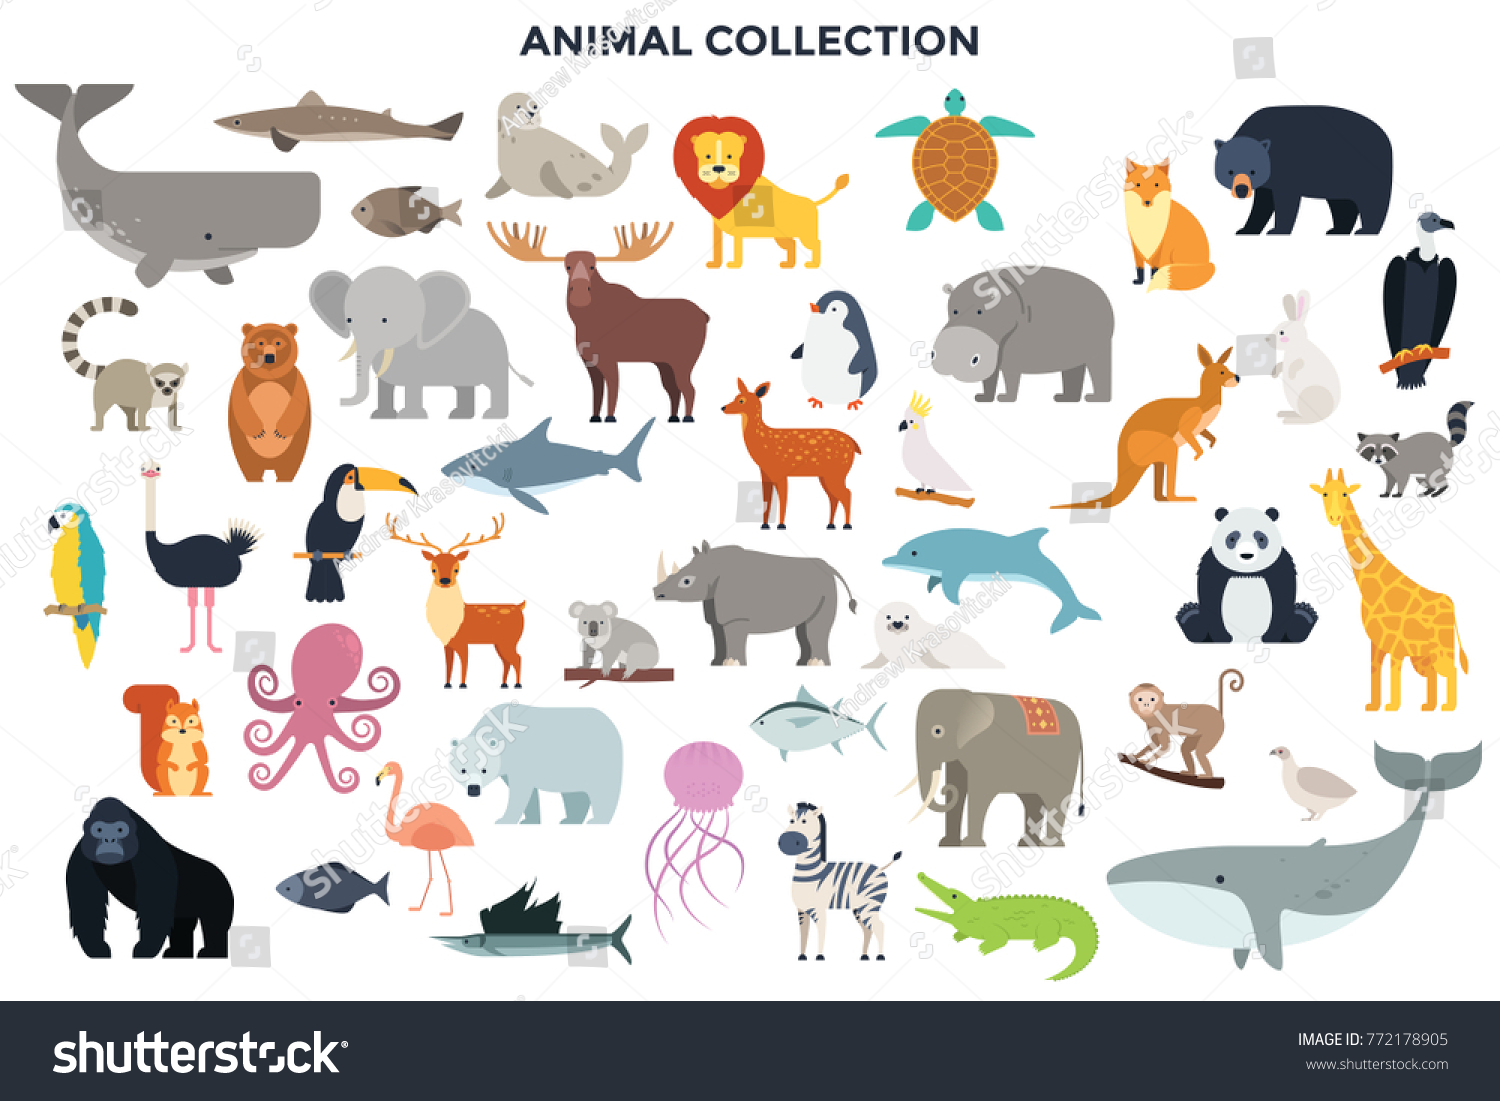 Big collection of wild jungle, savannah and forest animals, birds, marine mammals, fish. Set of cute cartoon characters isolated on white background. Colorful vector illustration in flat style. #772178905